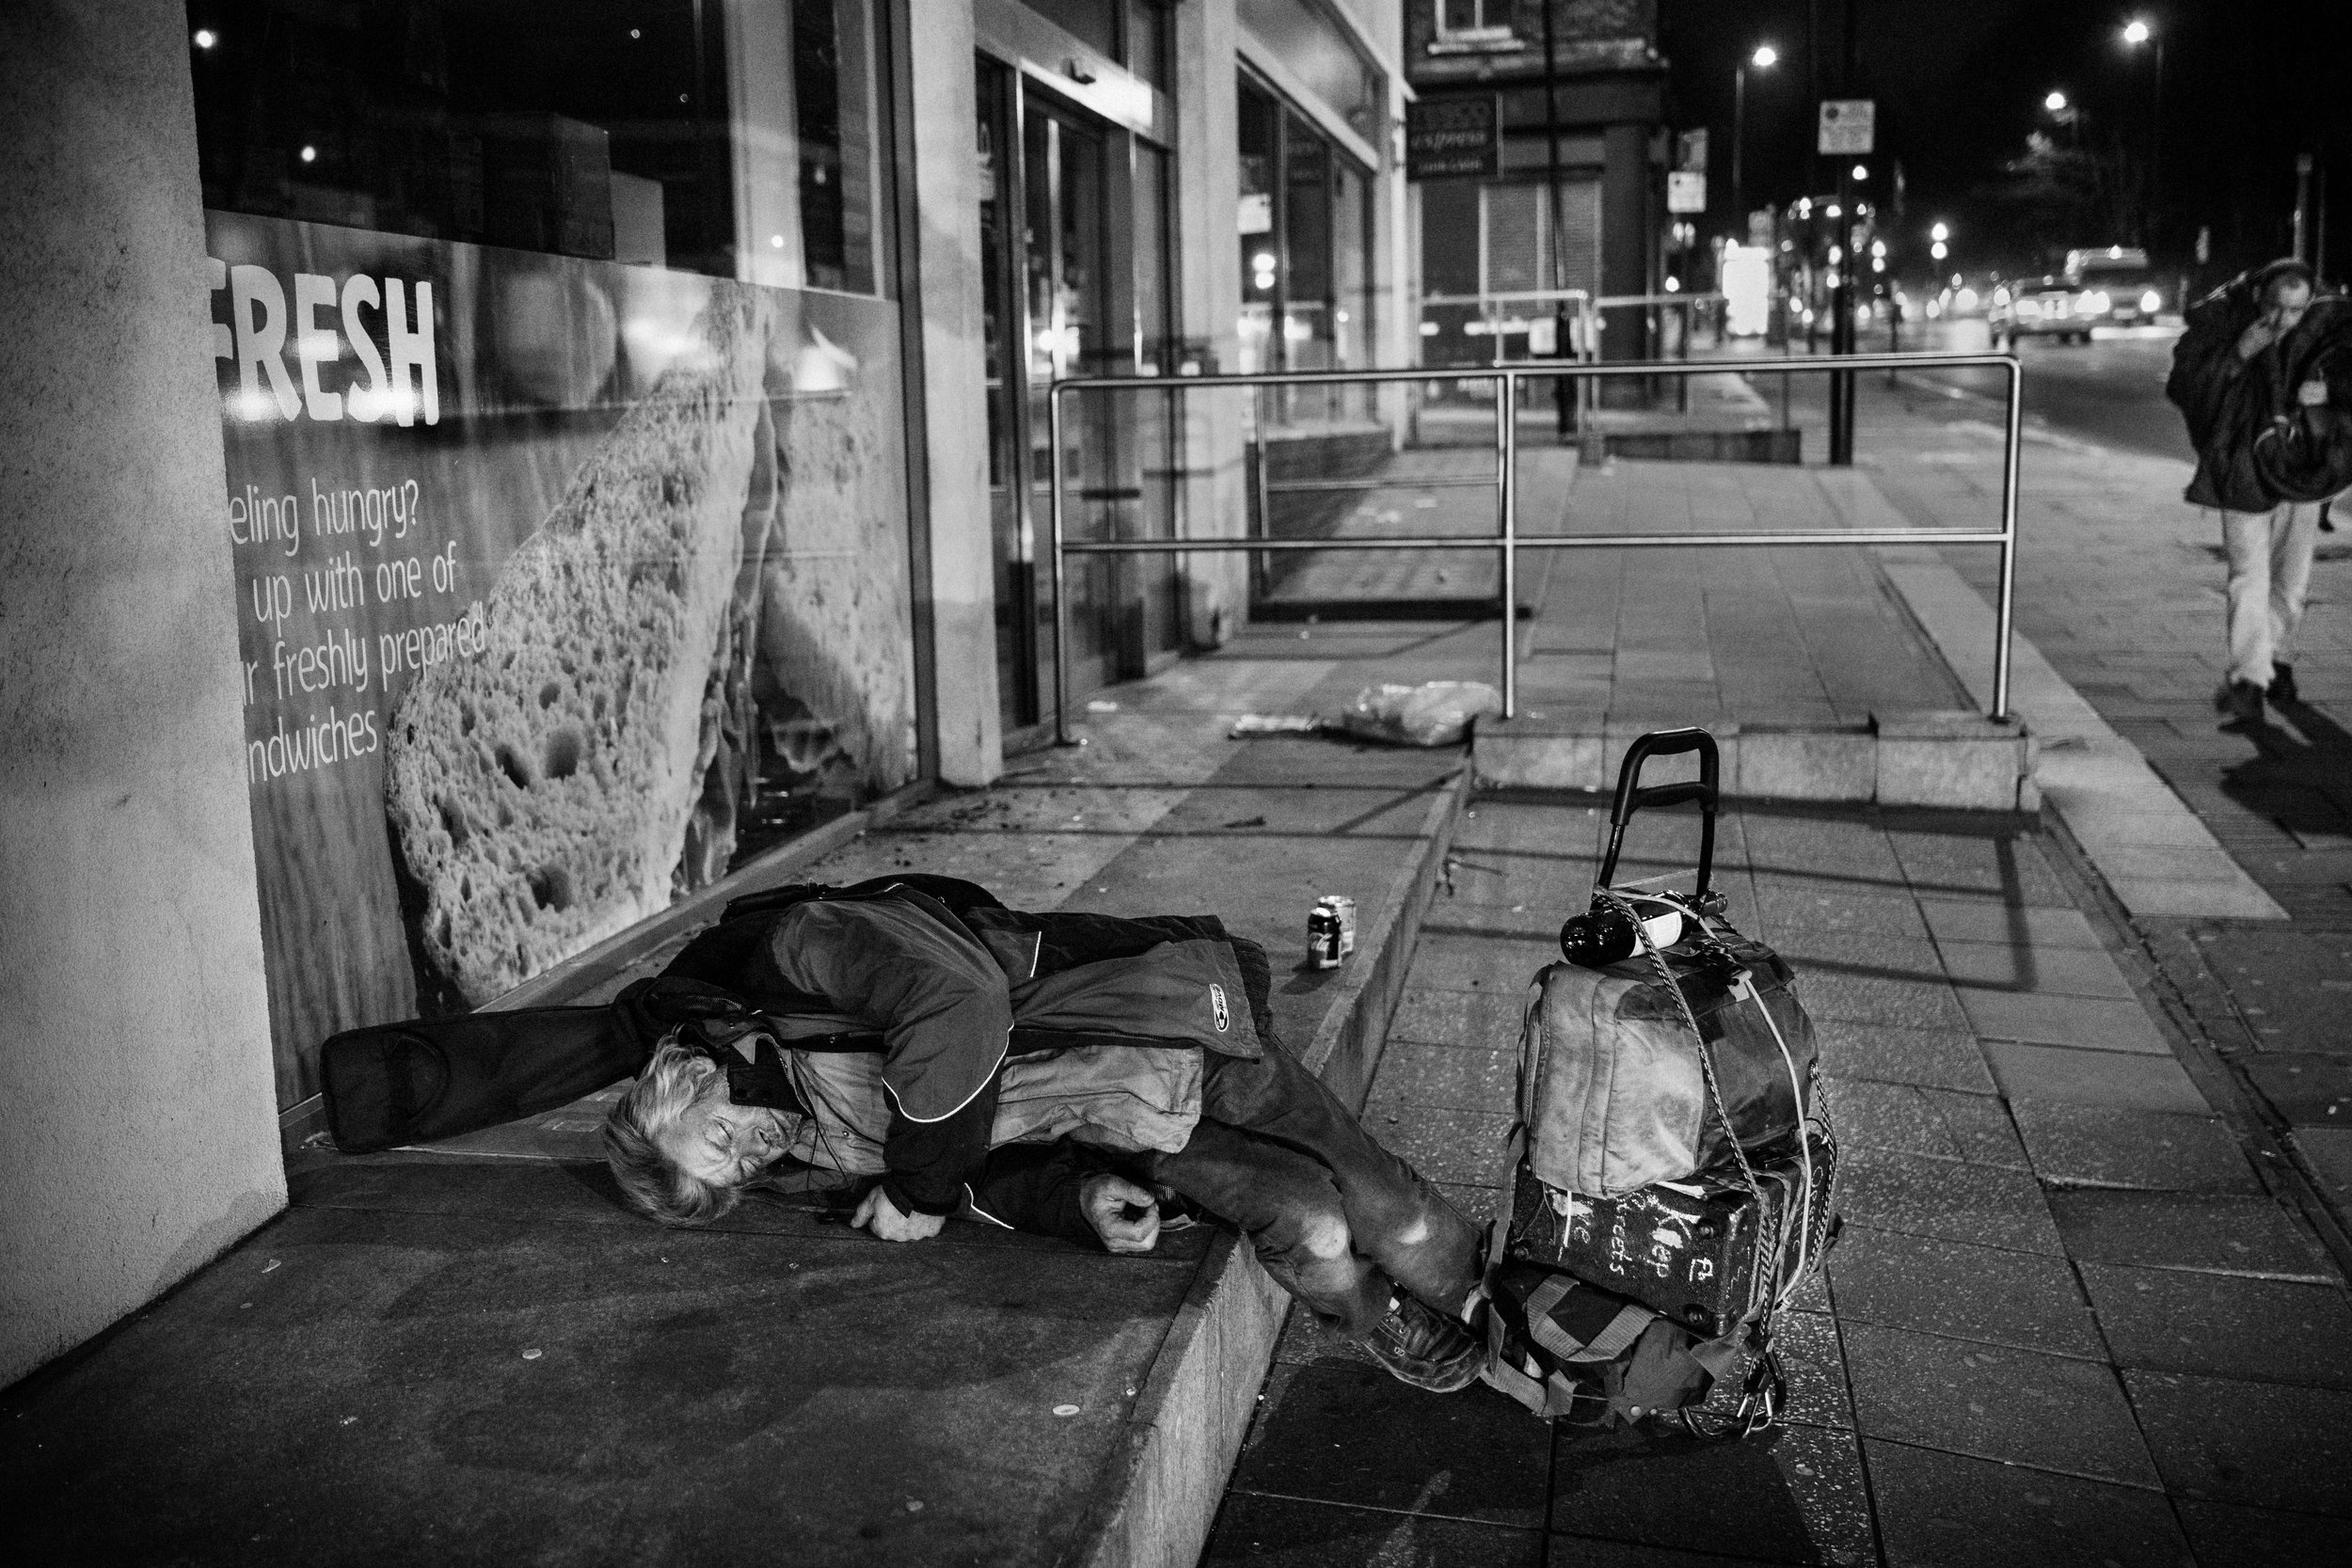  A homeless man lays on Pentonville Road in London, apparently passed out from drinking the wine tied to the top of his belongings on his trolley. His guitar is still strapped to his back. 
Photo by Edmond Terakopian, 21 March 2018
 